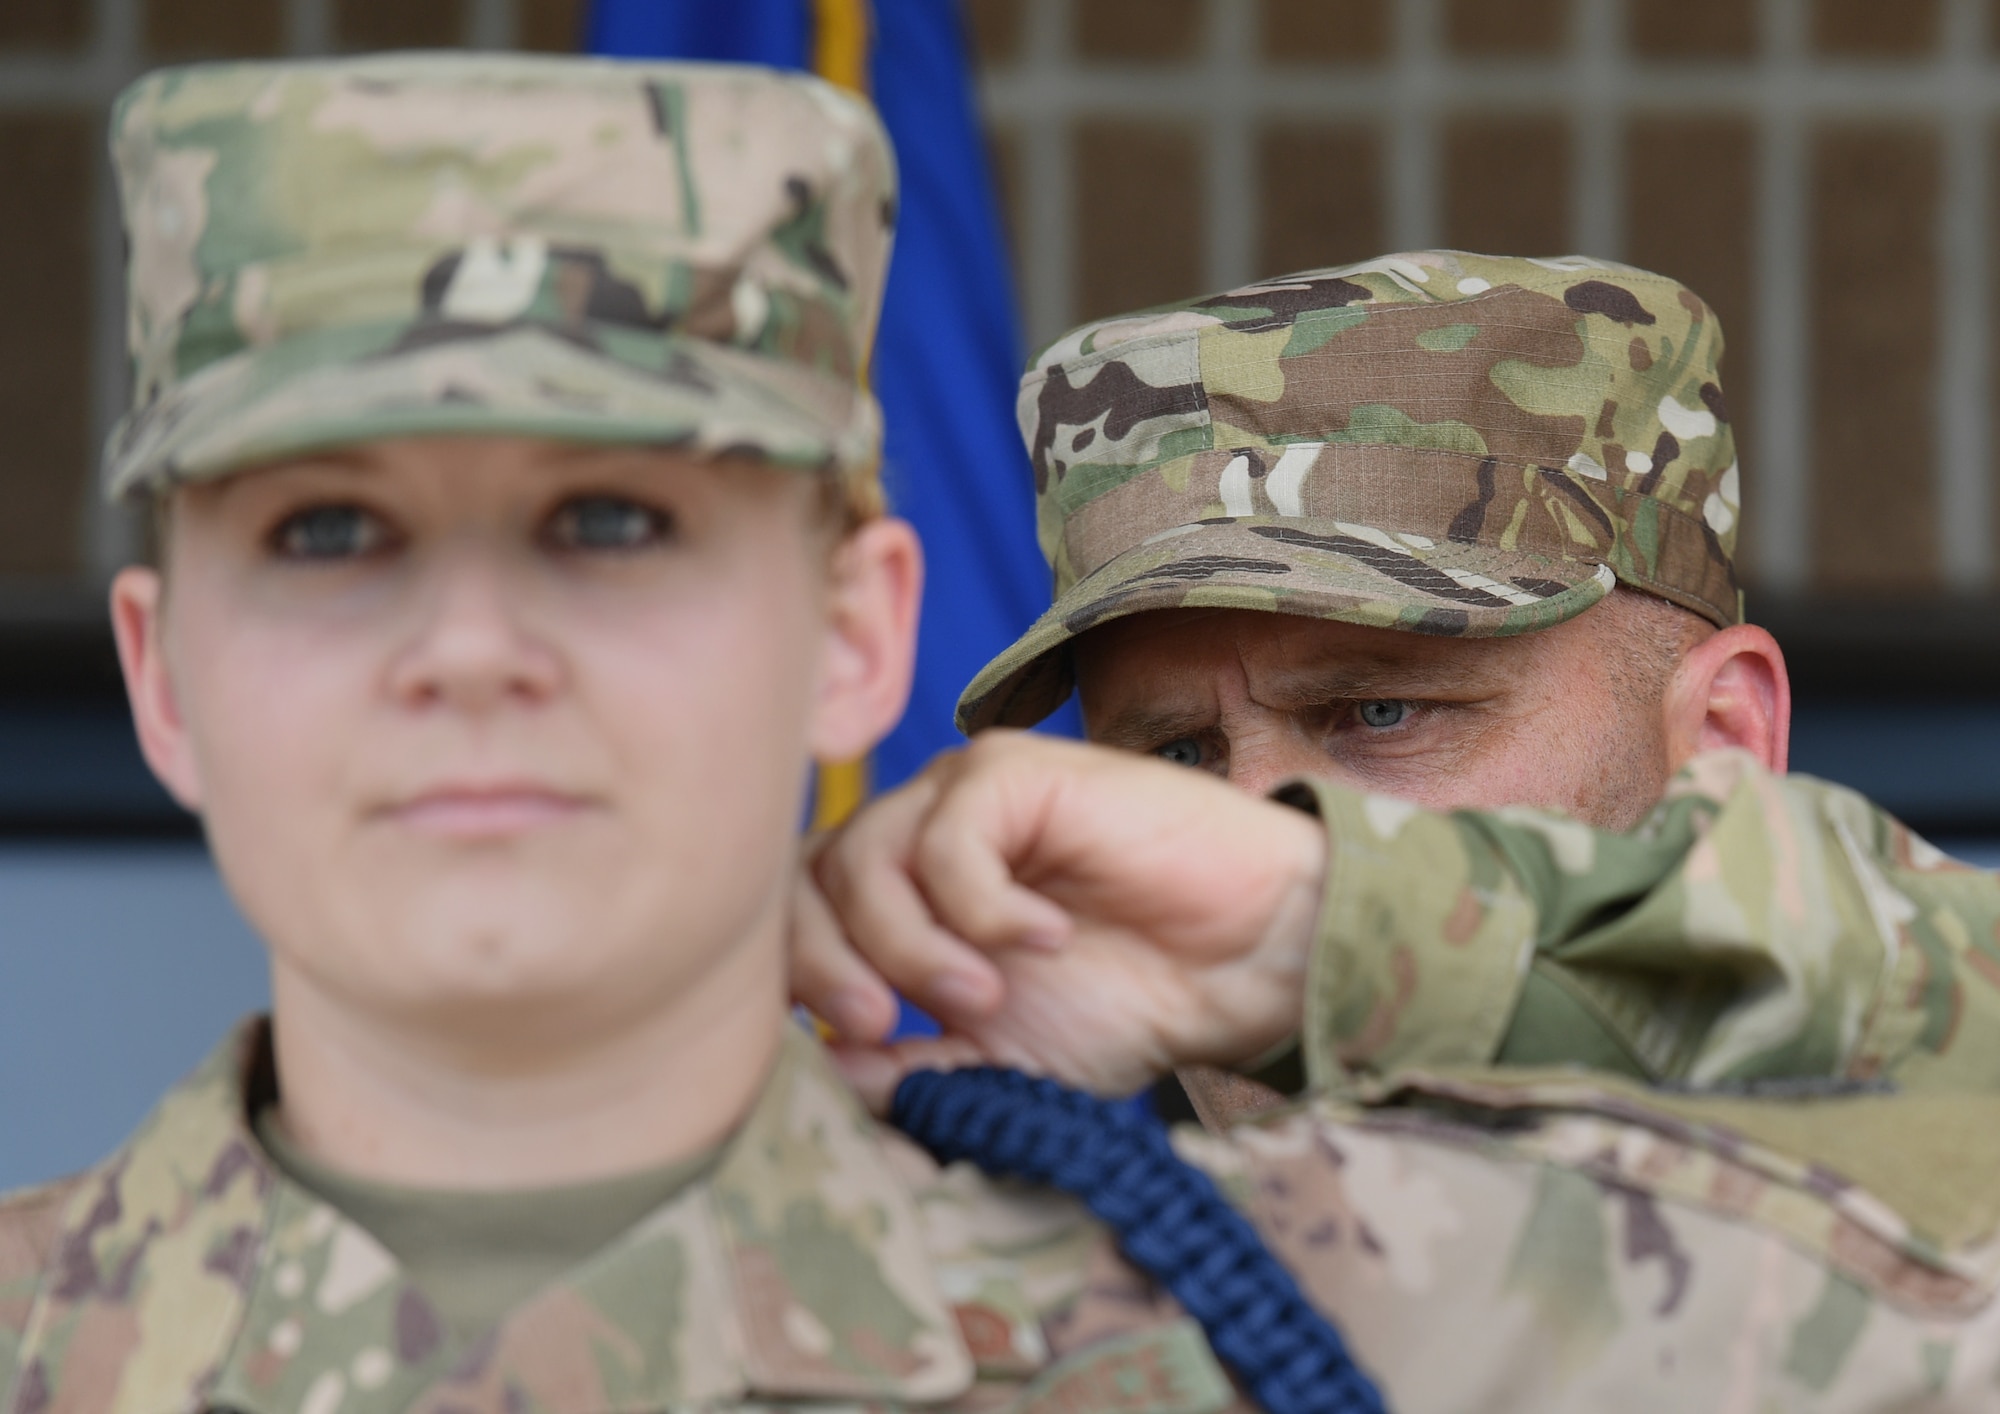 U.S. Air Force Chief Master Sgt. Anthony Fisher, 81st Training Group superintendent, presents a blue rope to Staff Sgt. Ashley Herring, 81st Training Support Squadron military training leader course student, during a MTL course graduation ceremony at the Levitow Training Support Facility on Keesler Air Force Base, Mississippi, May 30, 2019. The MTL course is responsible for training approximately 120 MTLs per year. Those MTLs are then responsible for training approximately 30,000 Airmen in 49 different locations that fall under Air Education and Training Command. (U.S. Air Force photo by Kemberly Groue)